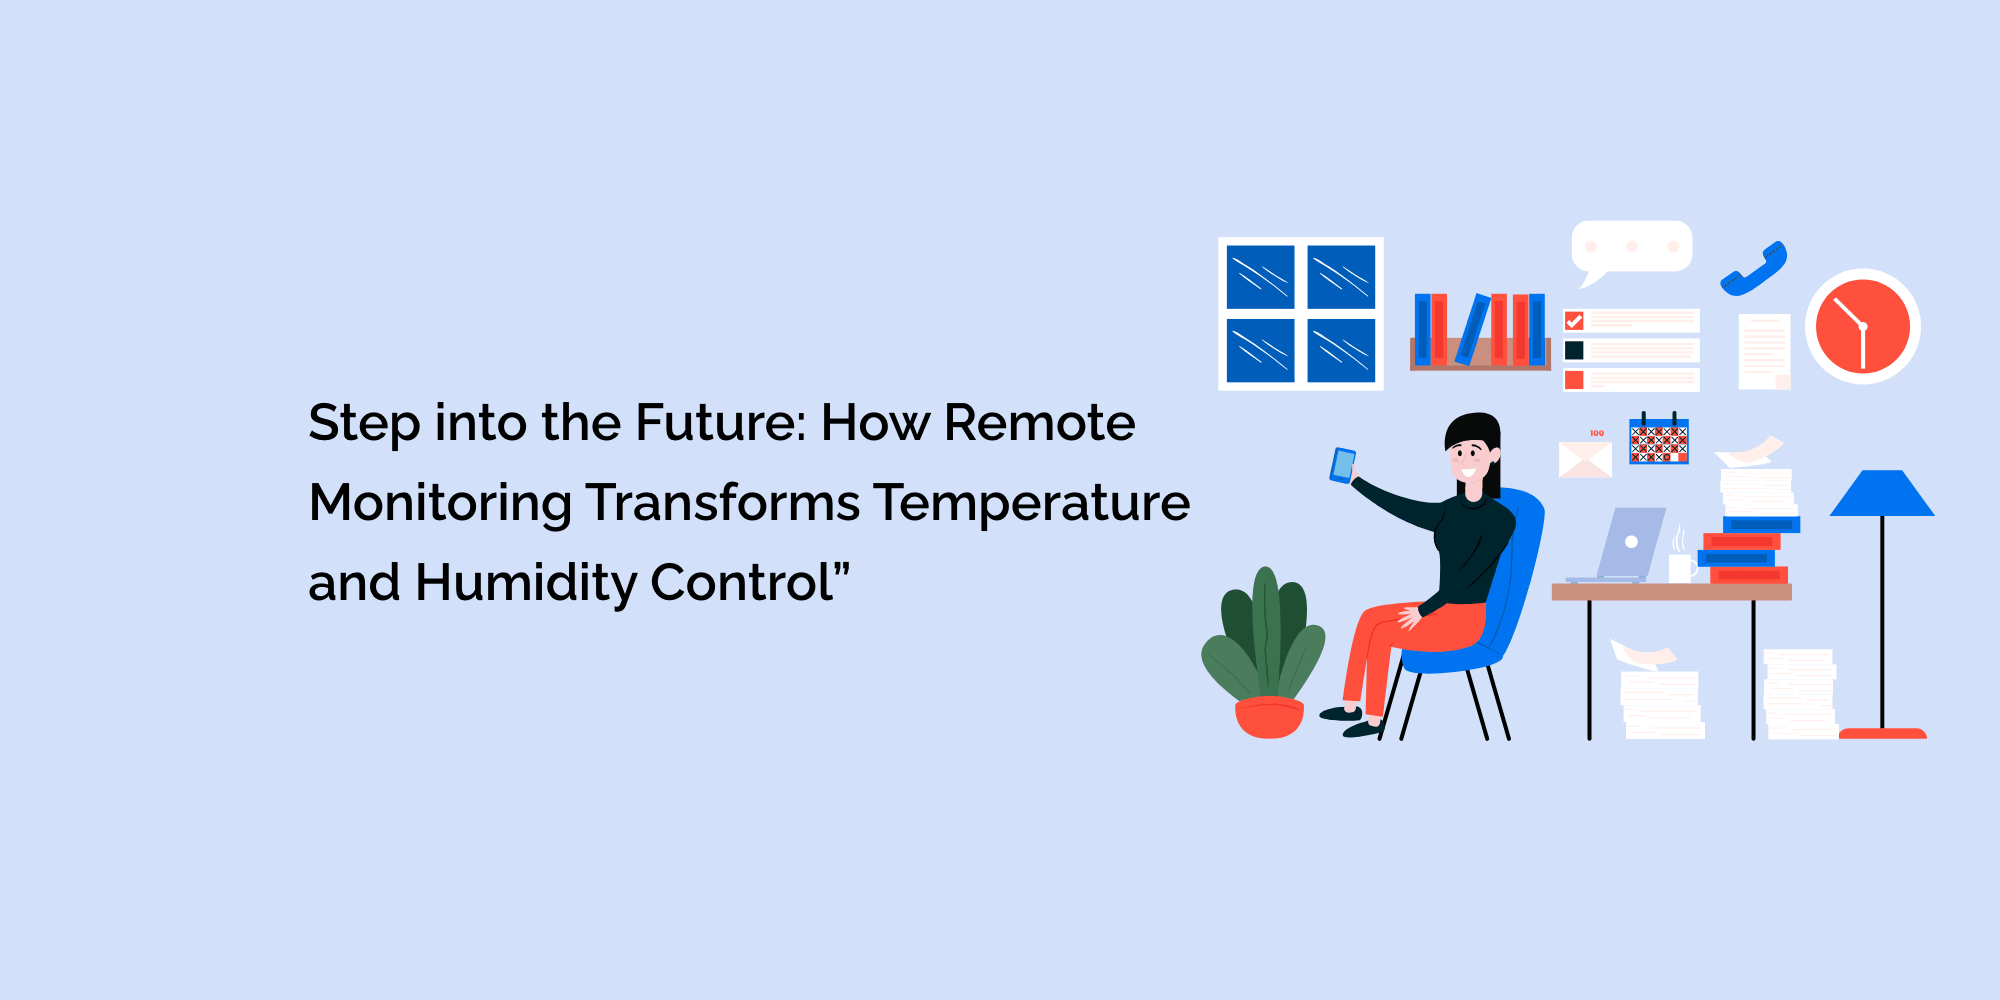 Step into the Future: How Remote Monitoring Transforms Temperature and Humidity Control"